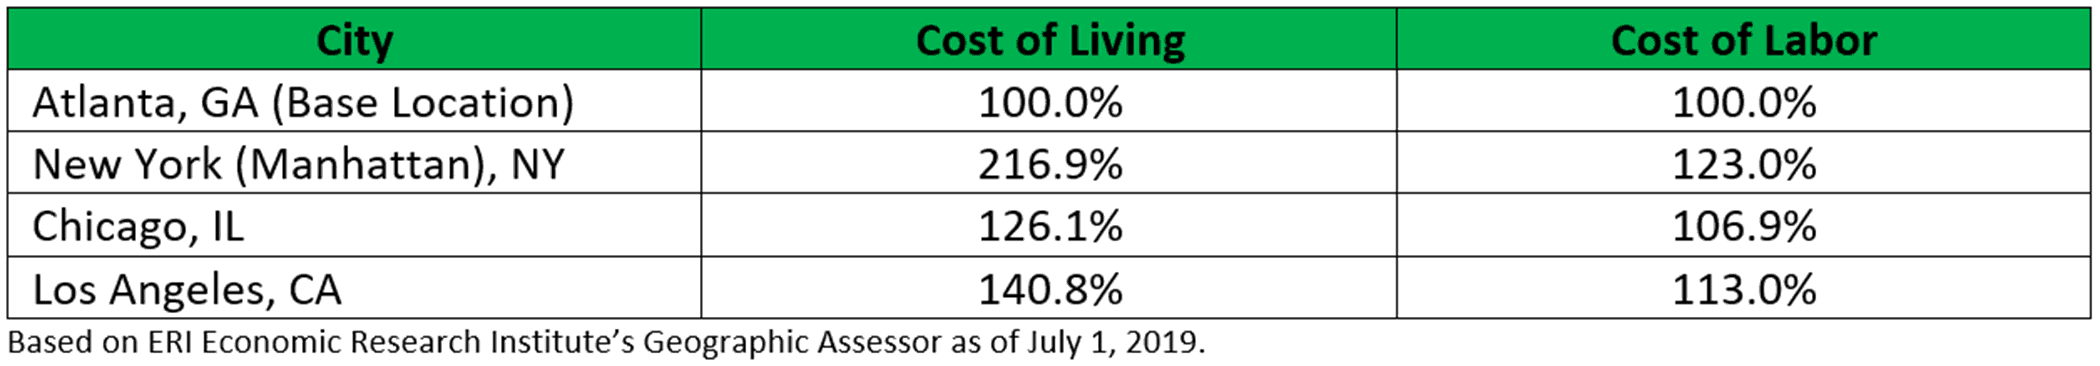 cost of living cost of labor